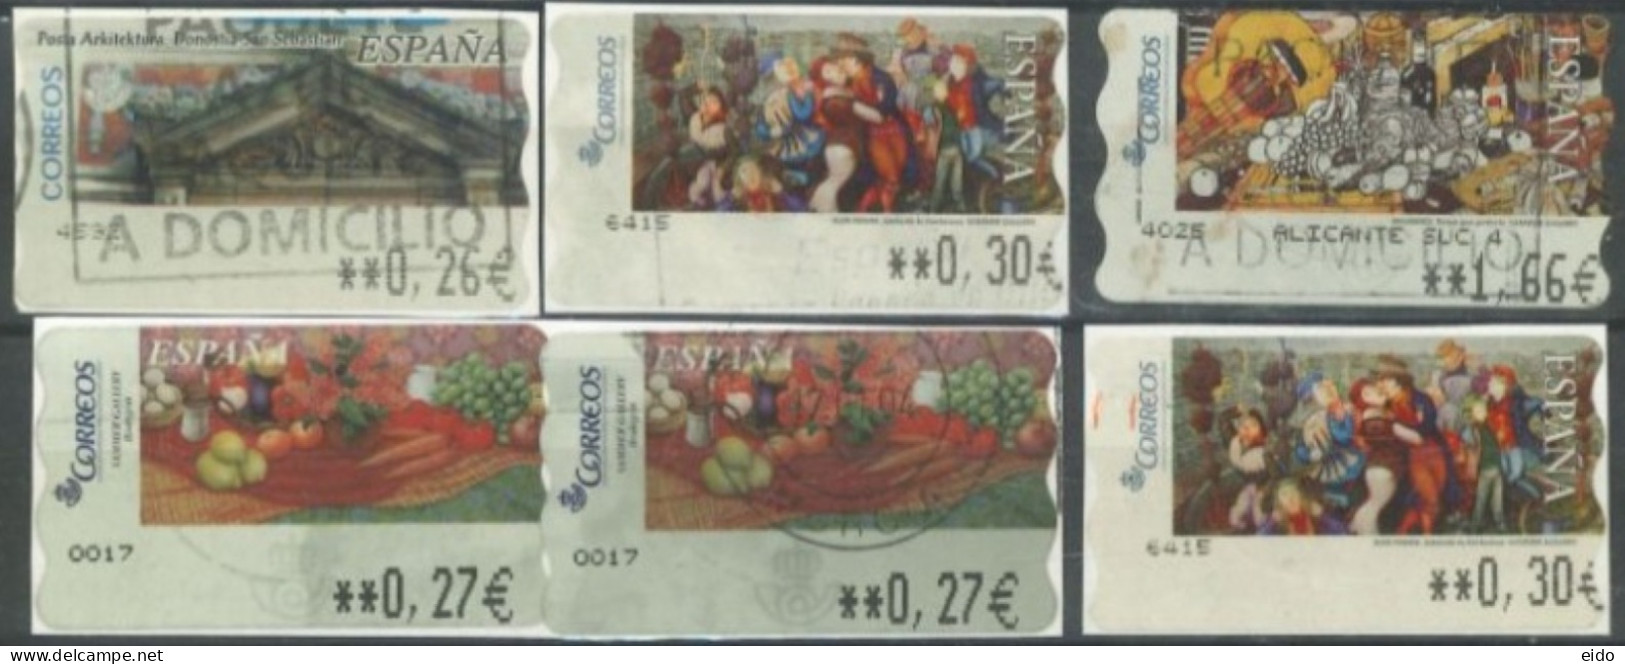 SPAIN- 2003/04,SAN SABASTIAN ARCH. AND SAMMER GALLERY STAMPS LABELS SET OF 6, DIFFERENT VALUES, USED. - Oblitérés